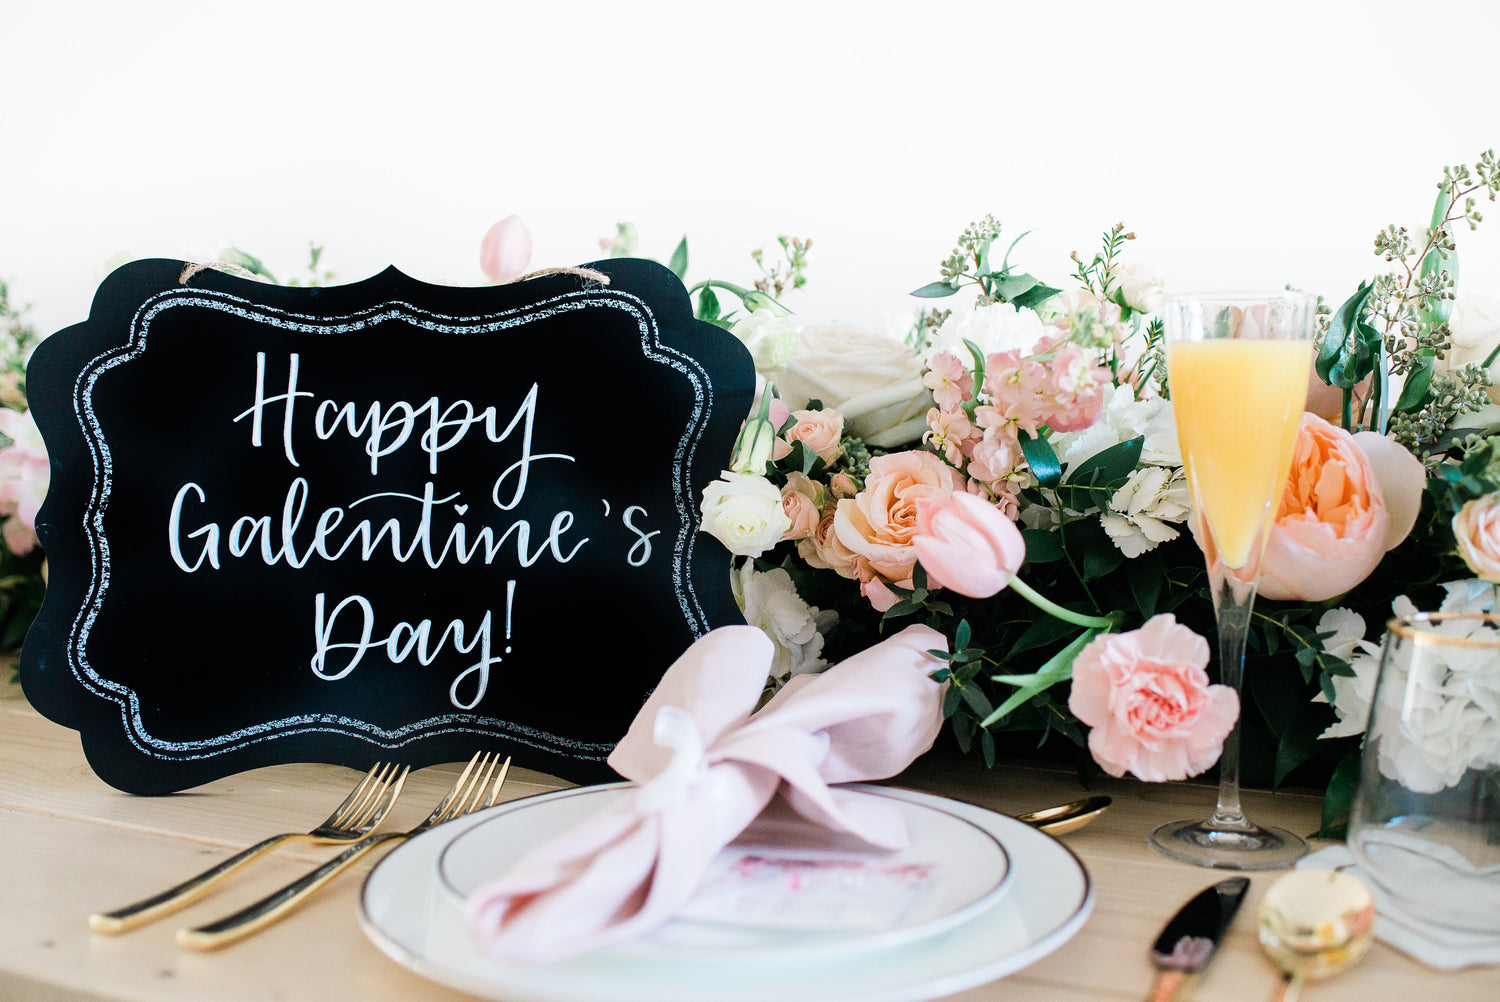 Give your Galentine’s celebration an elegant makeover that your gals won’t forget